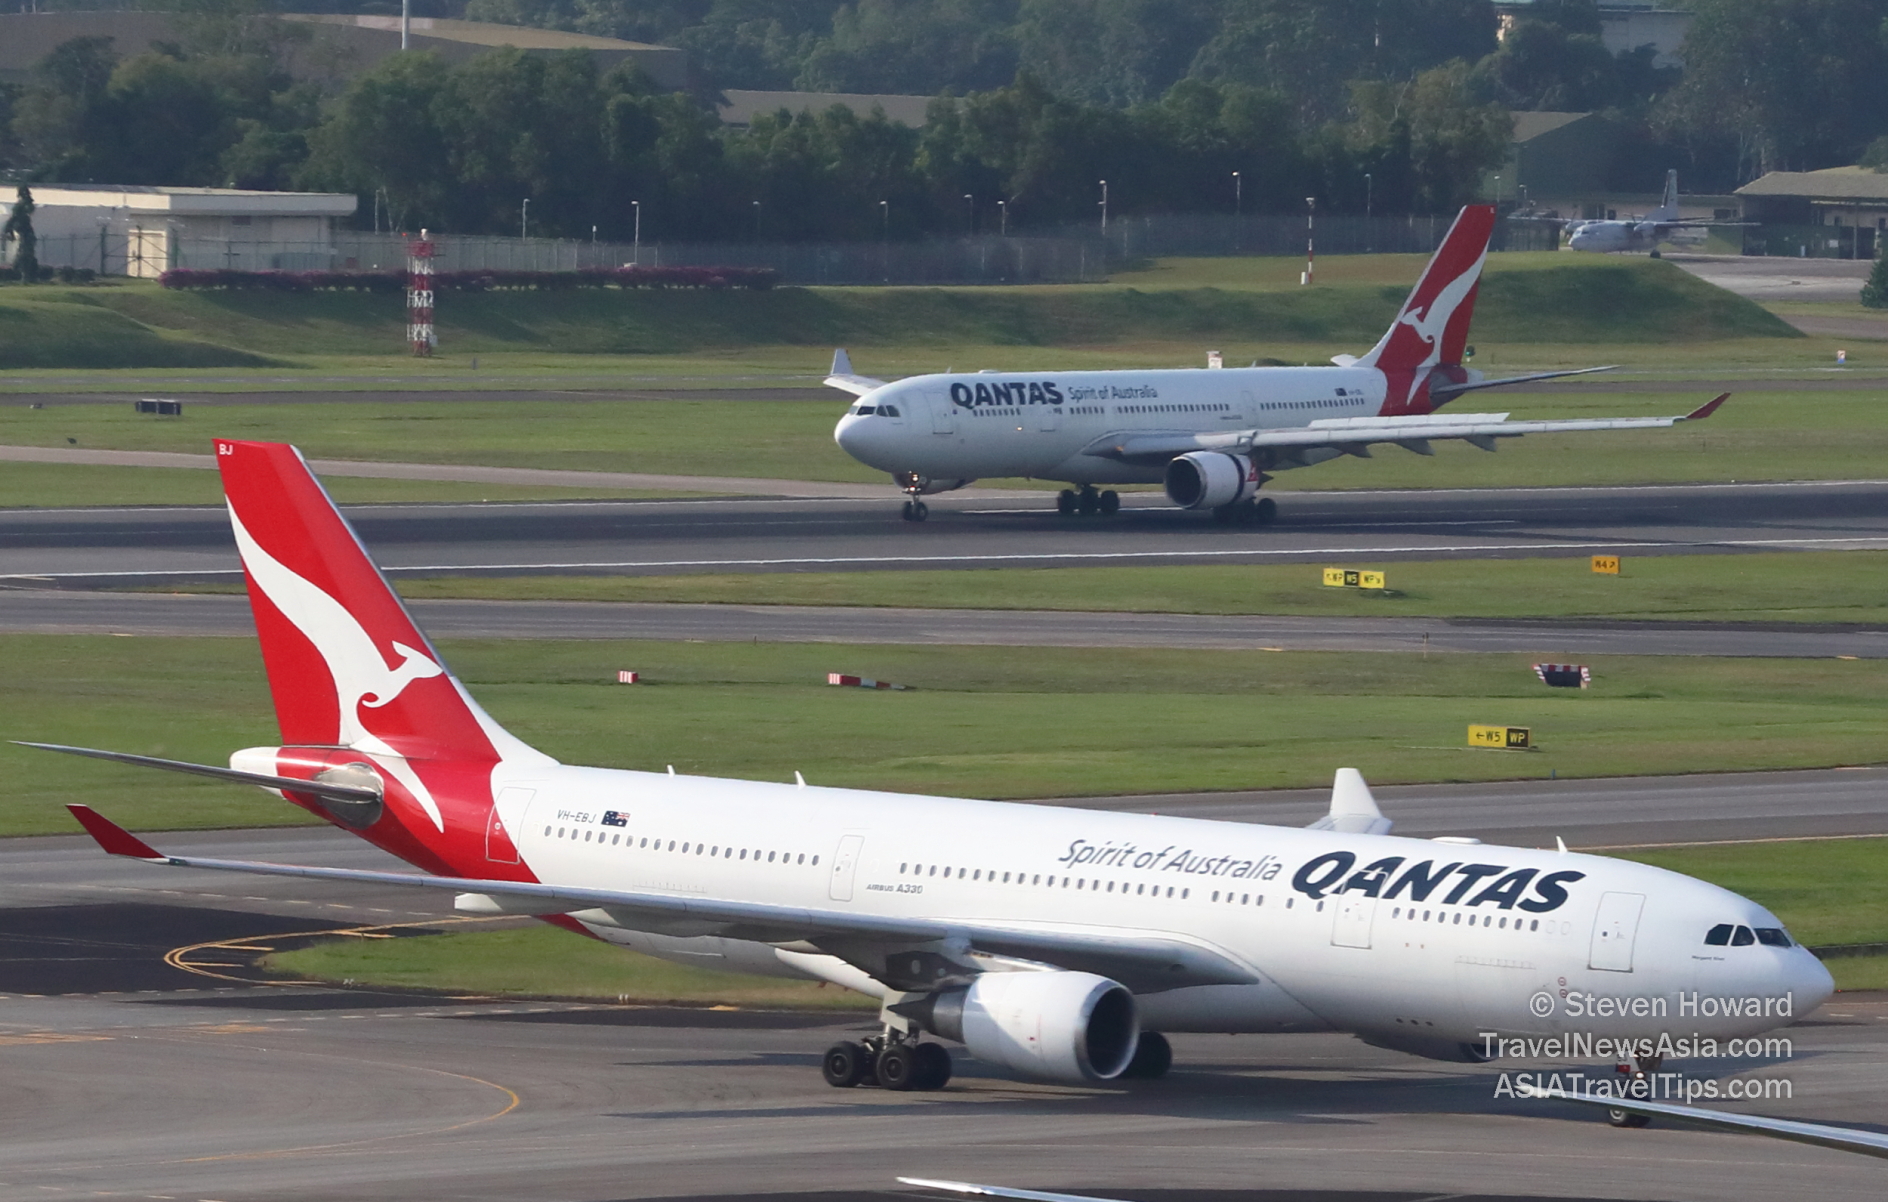 Qantas' new A350s and B787s will replace its A330s. Picture by Steven Howard of TravelNewsAsia.com Click to enlarge.